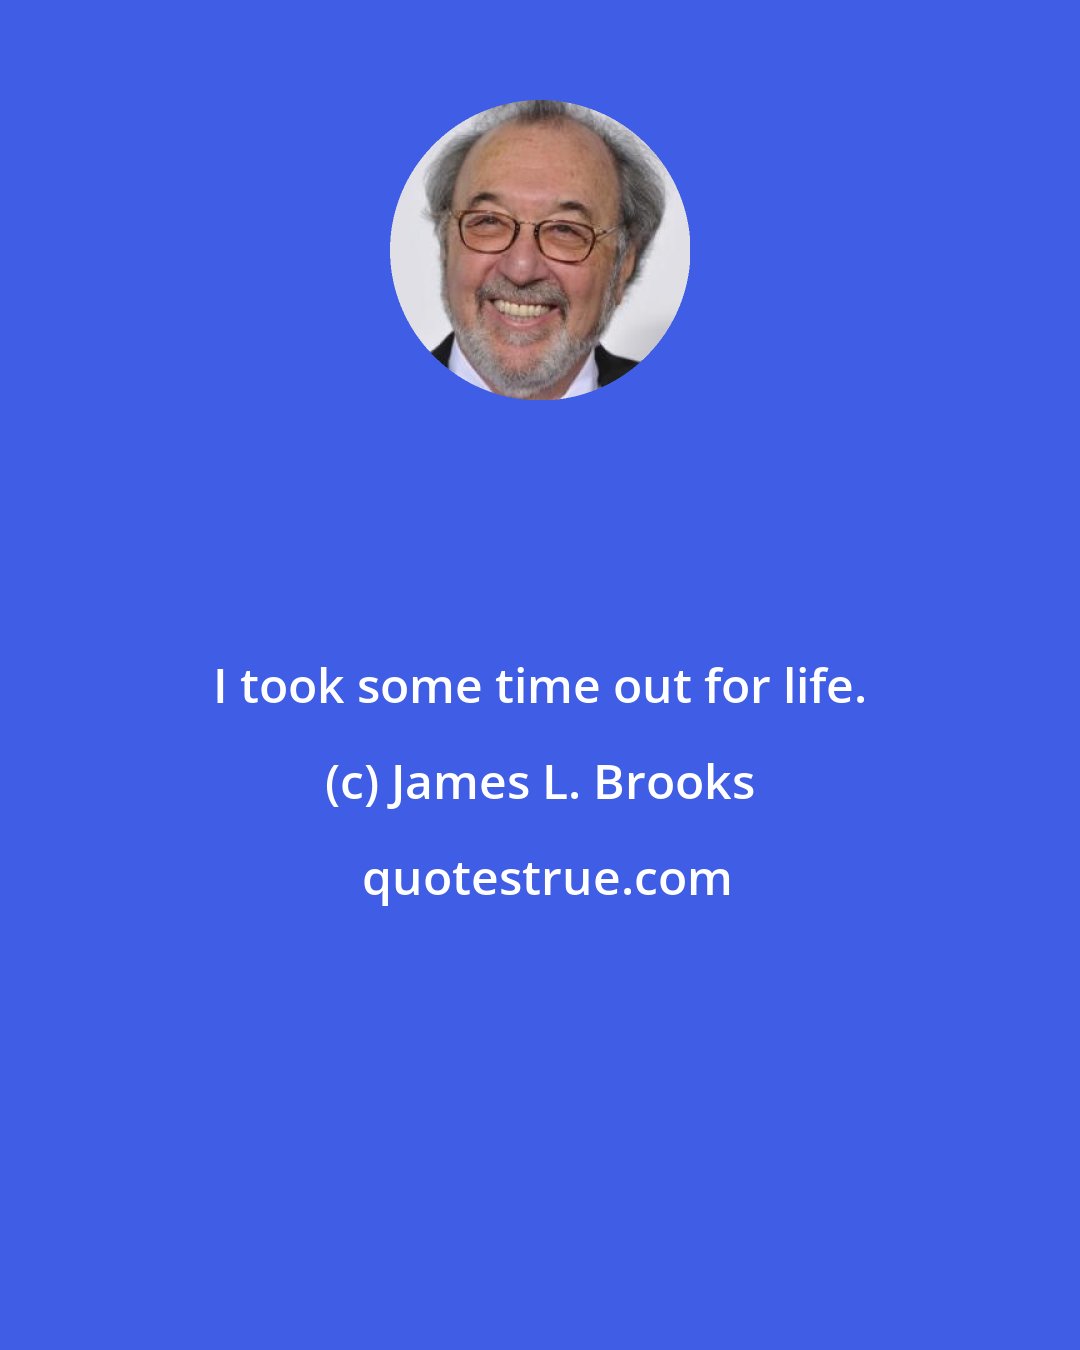 James L. Brooks: I took some time out for life.